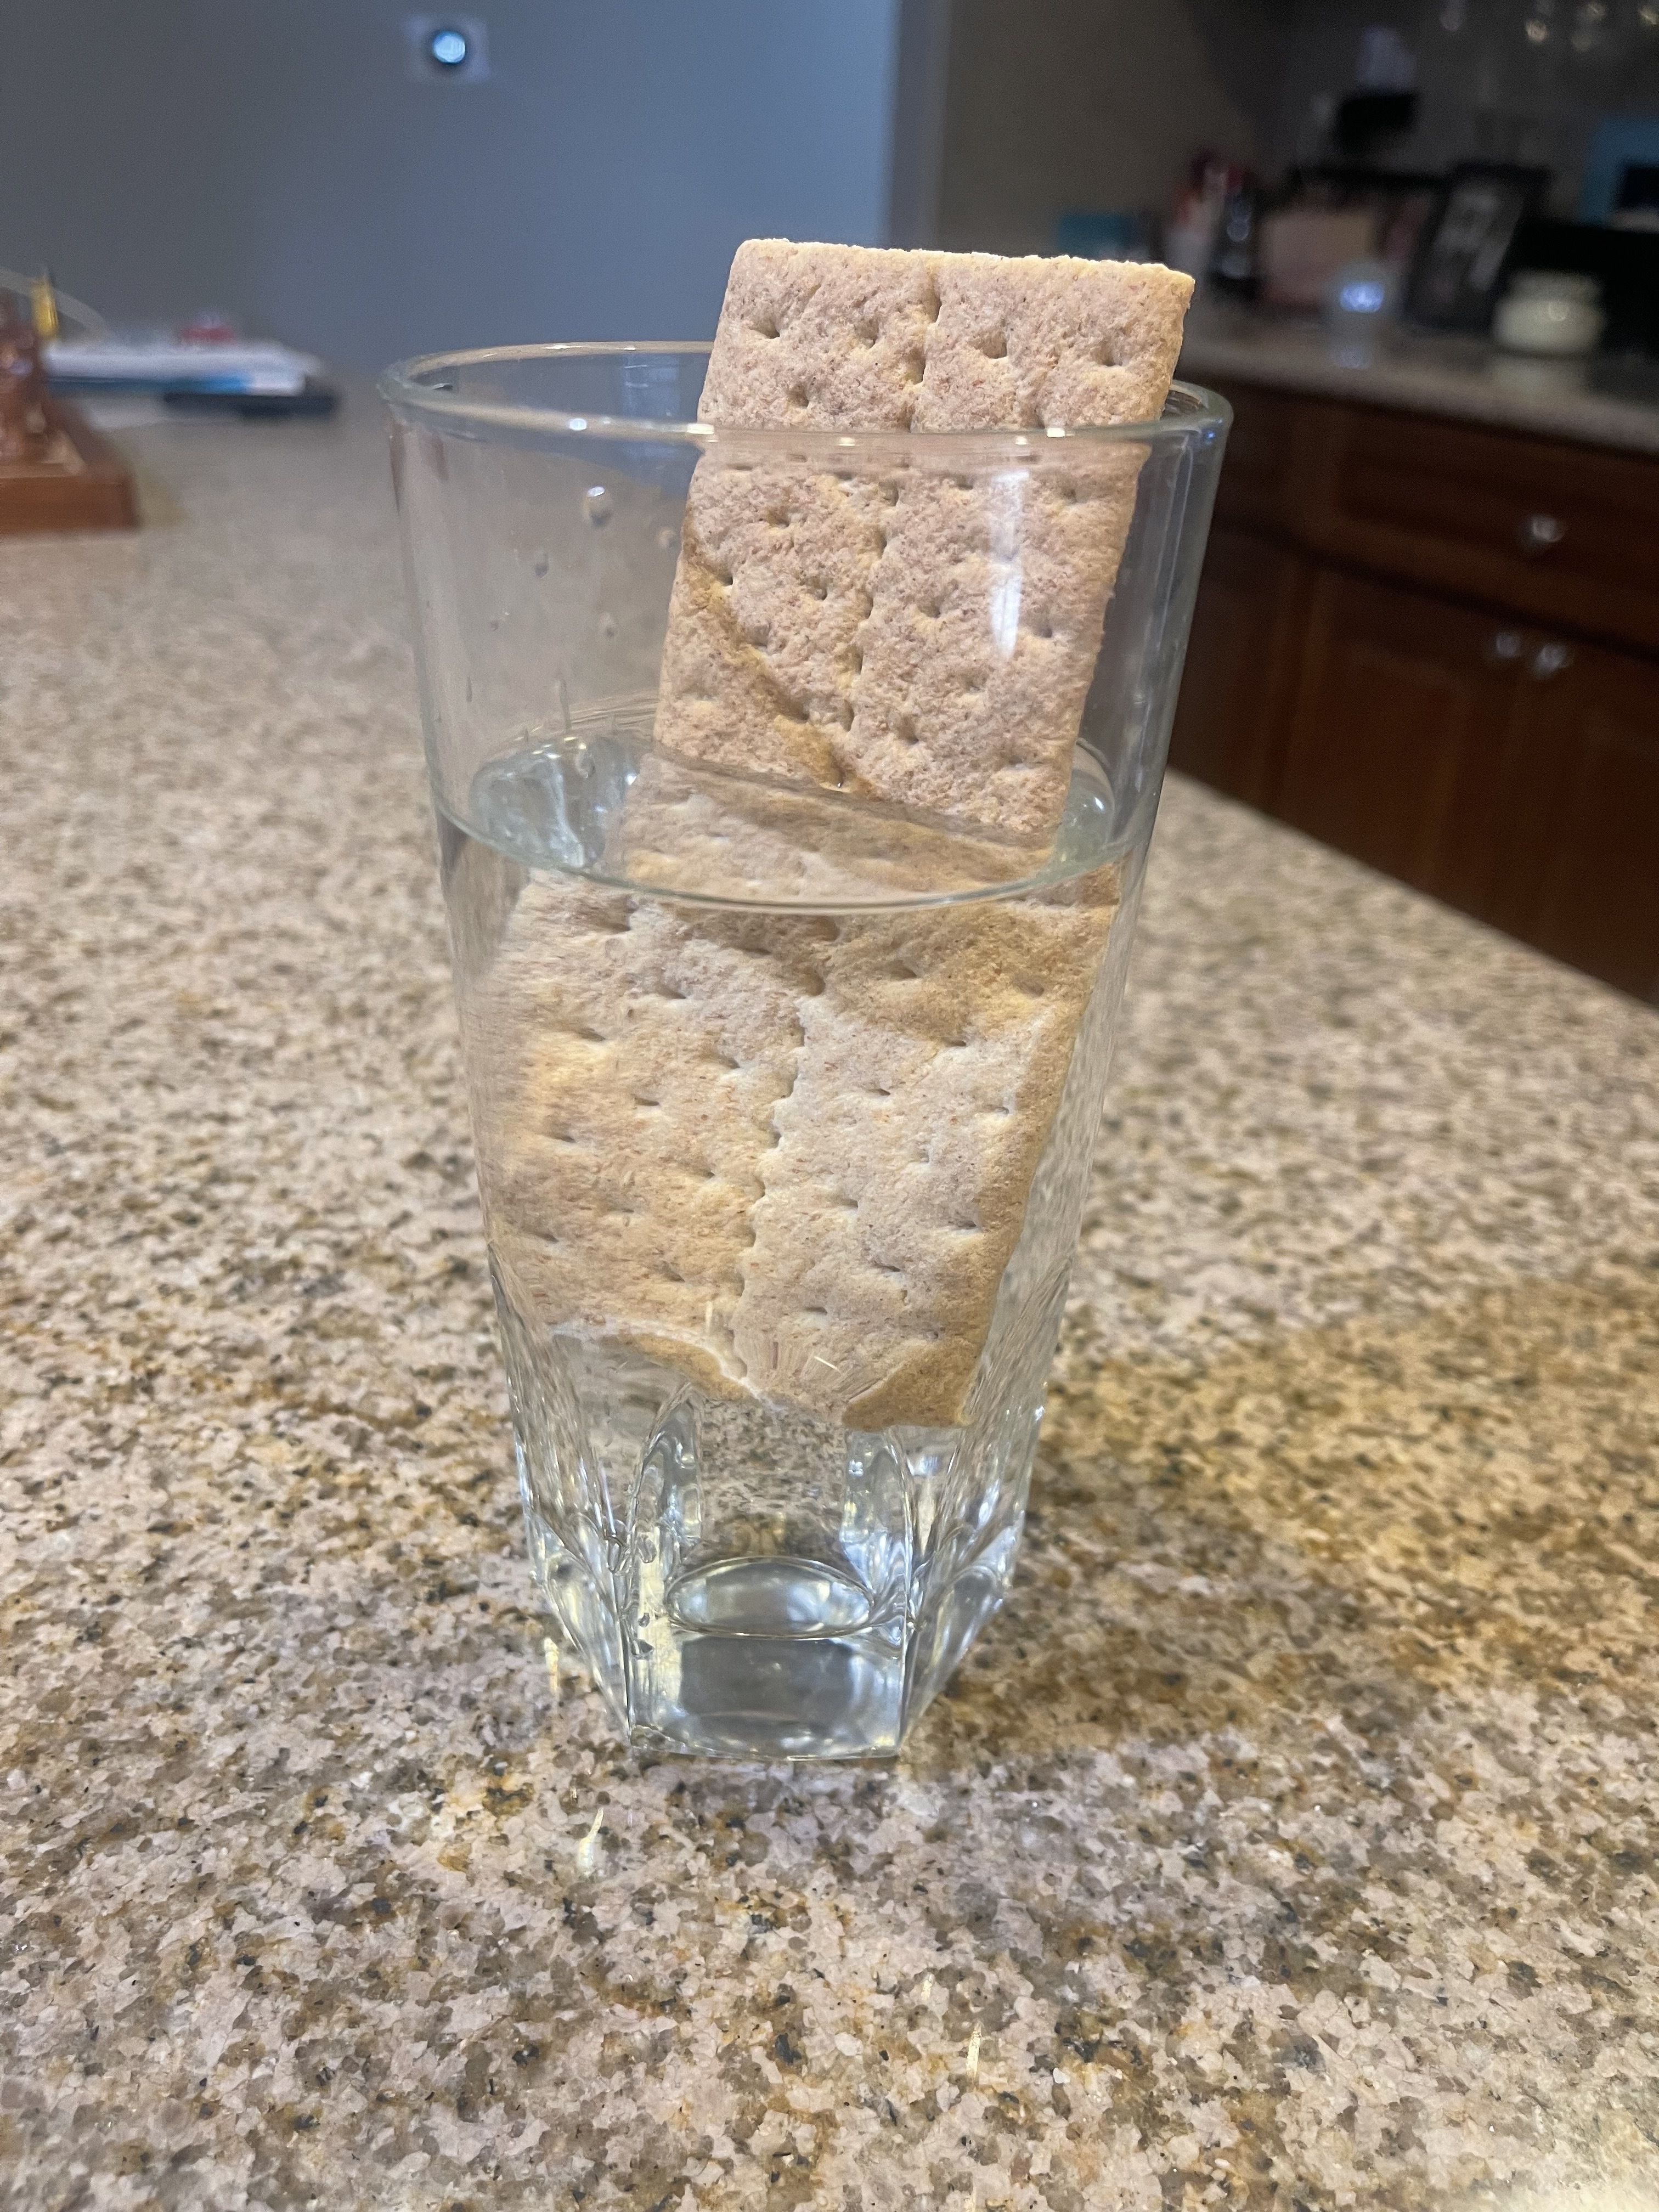 graham crackers in a glass of water